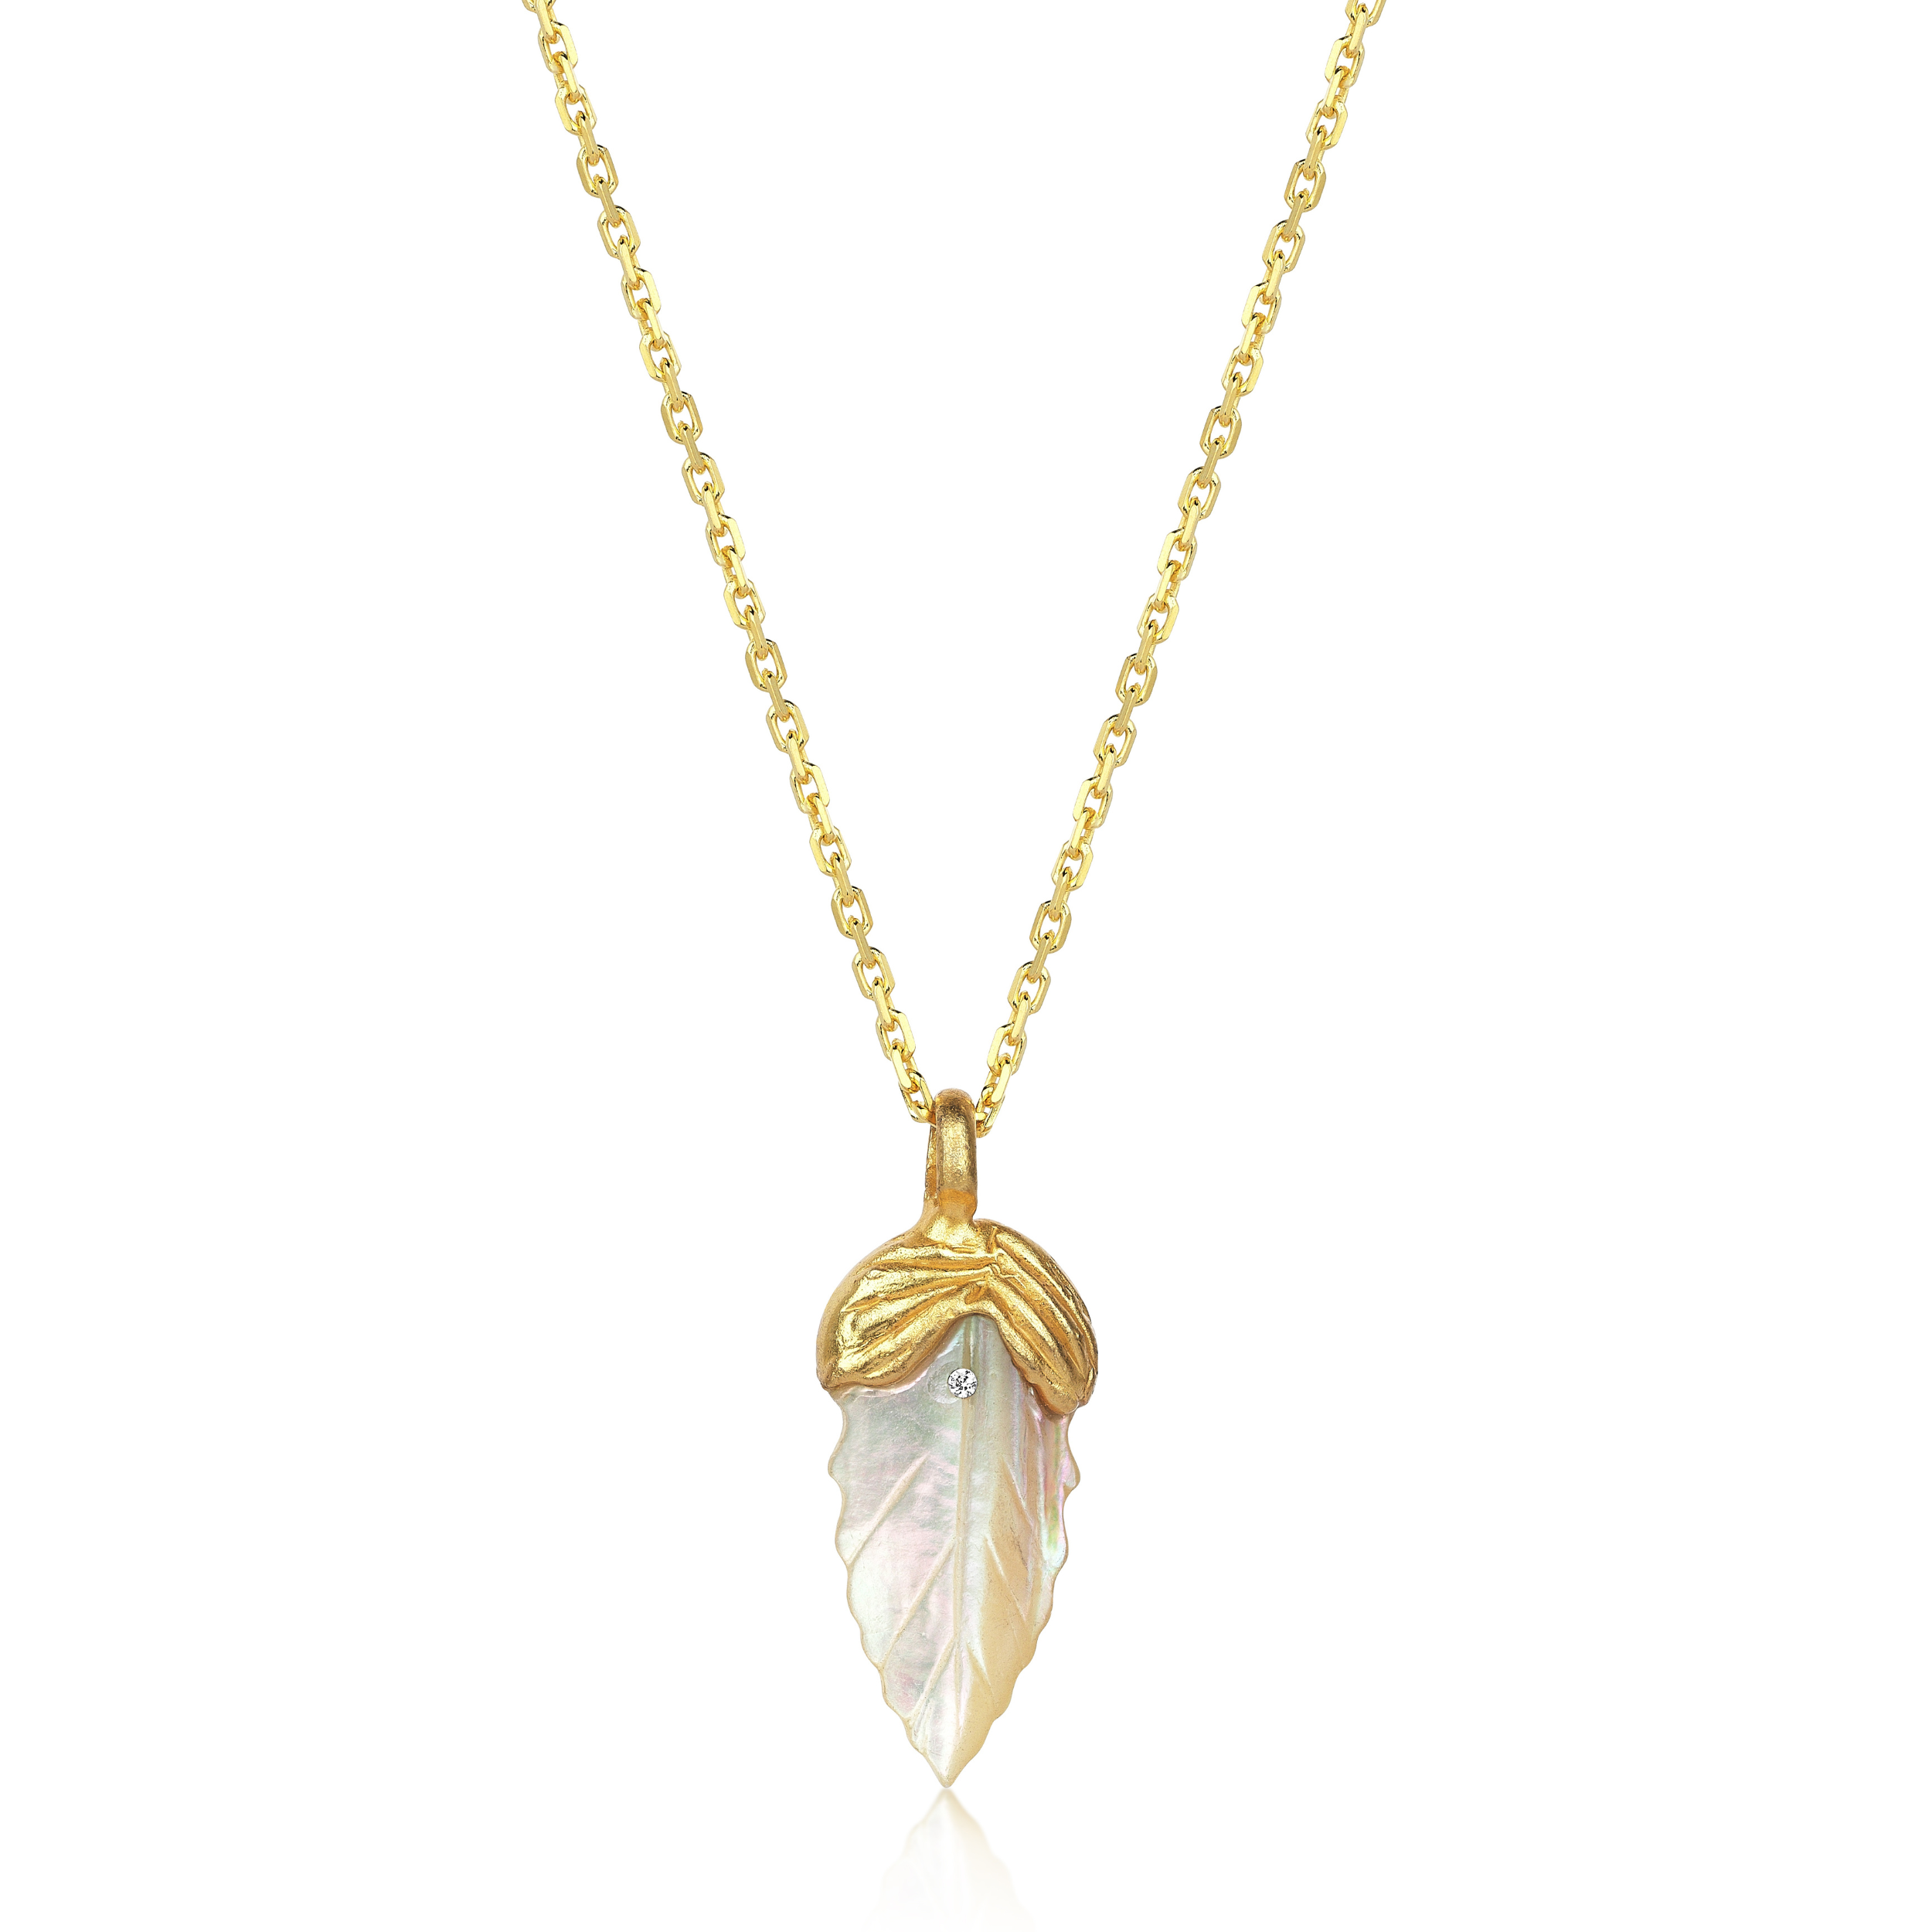 THE PEARL LEAF NECKLACE